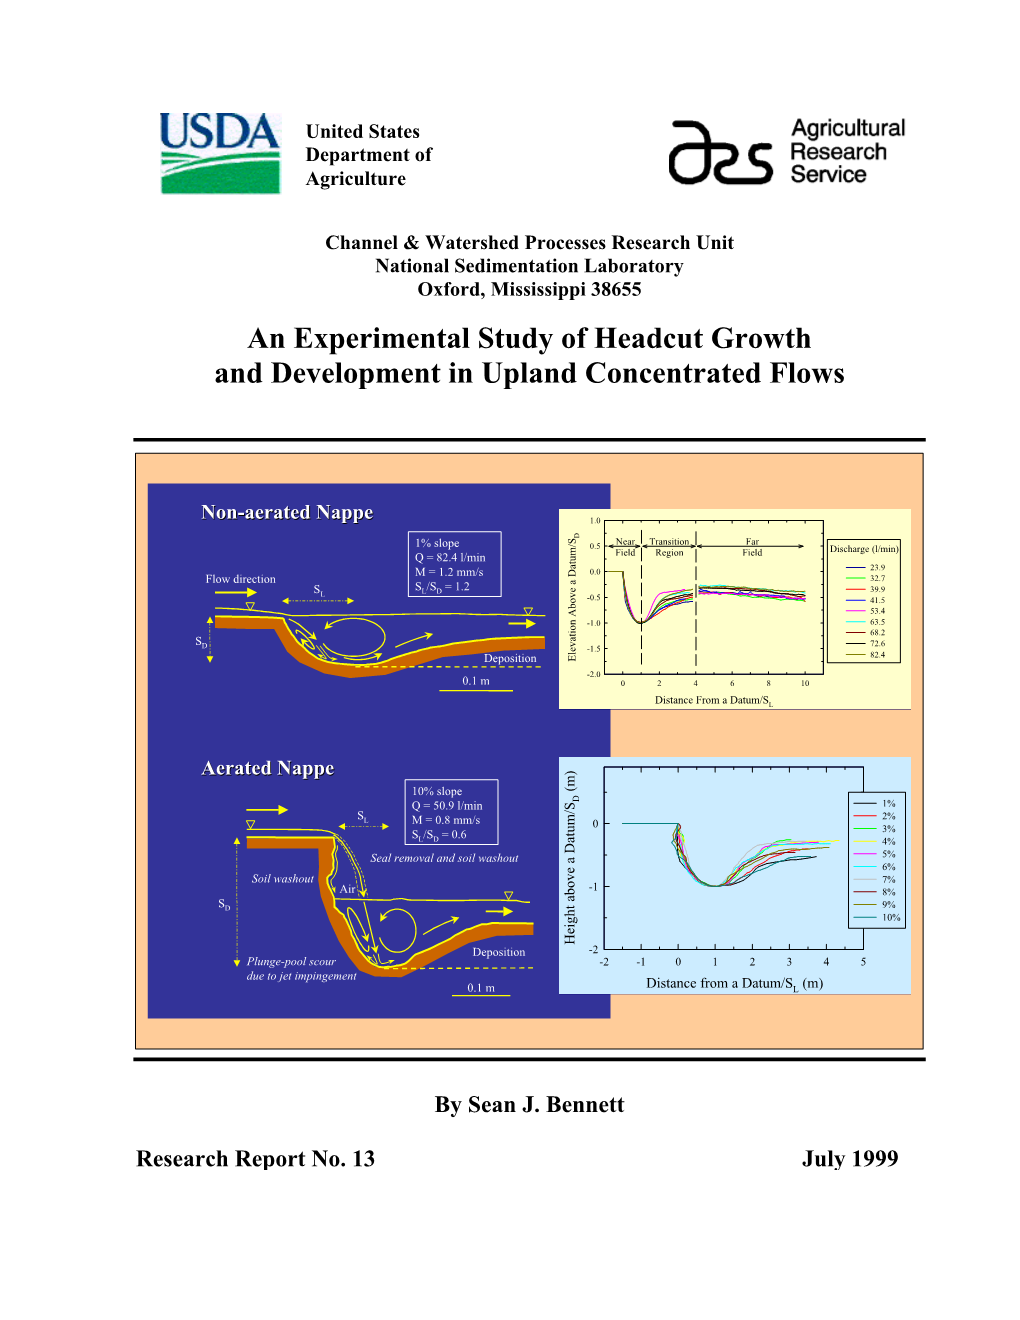 An Experimental Study of Headcut Growth and Development in Upland Concentrated Flows